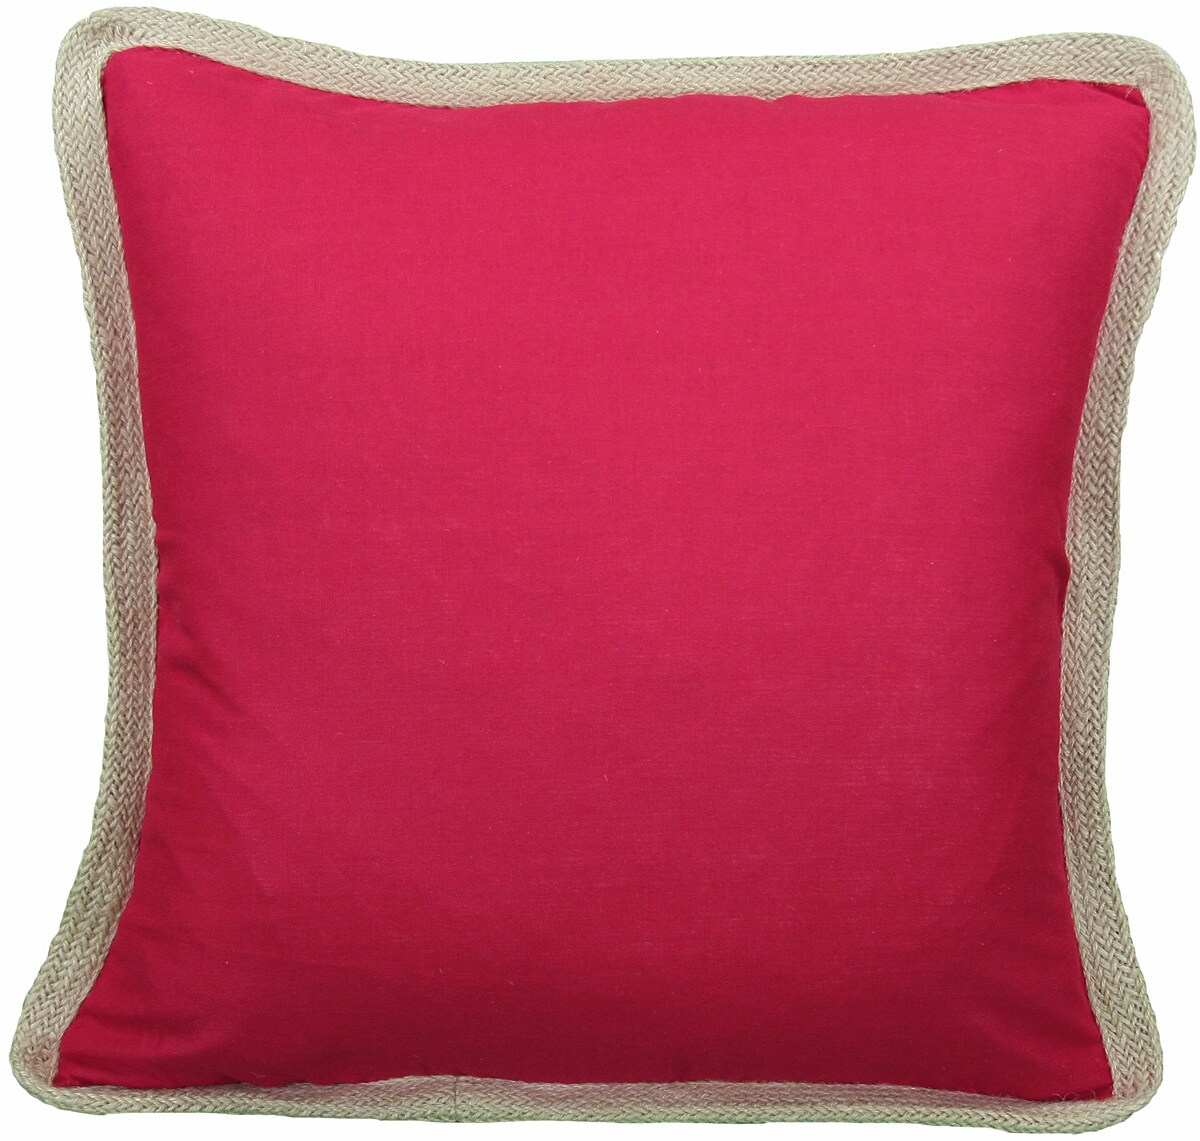 Feather & Down Square Throw Pillow Insert - Bokser Home